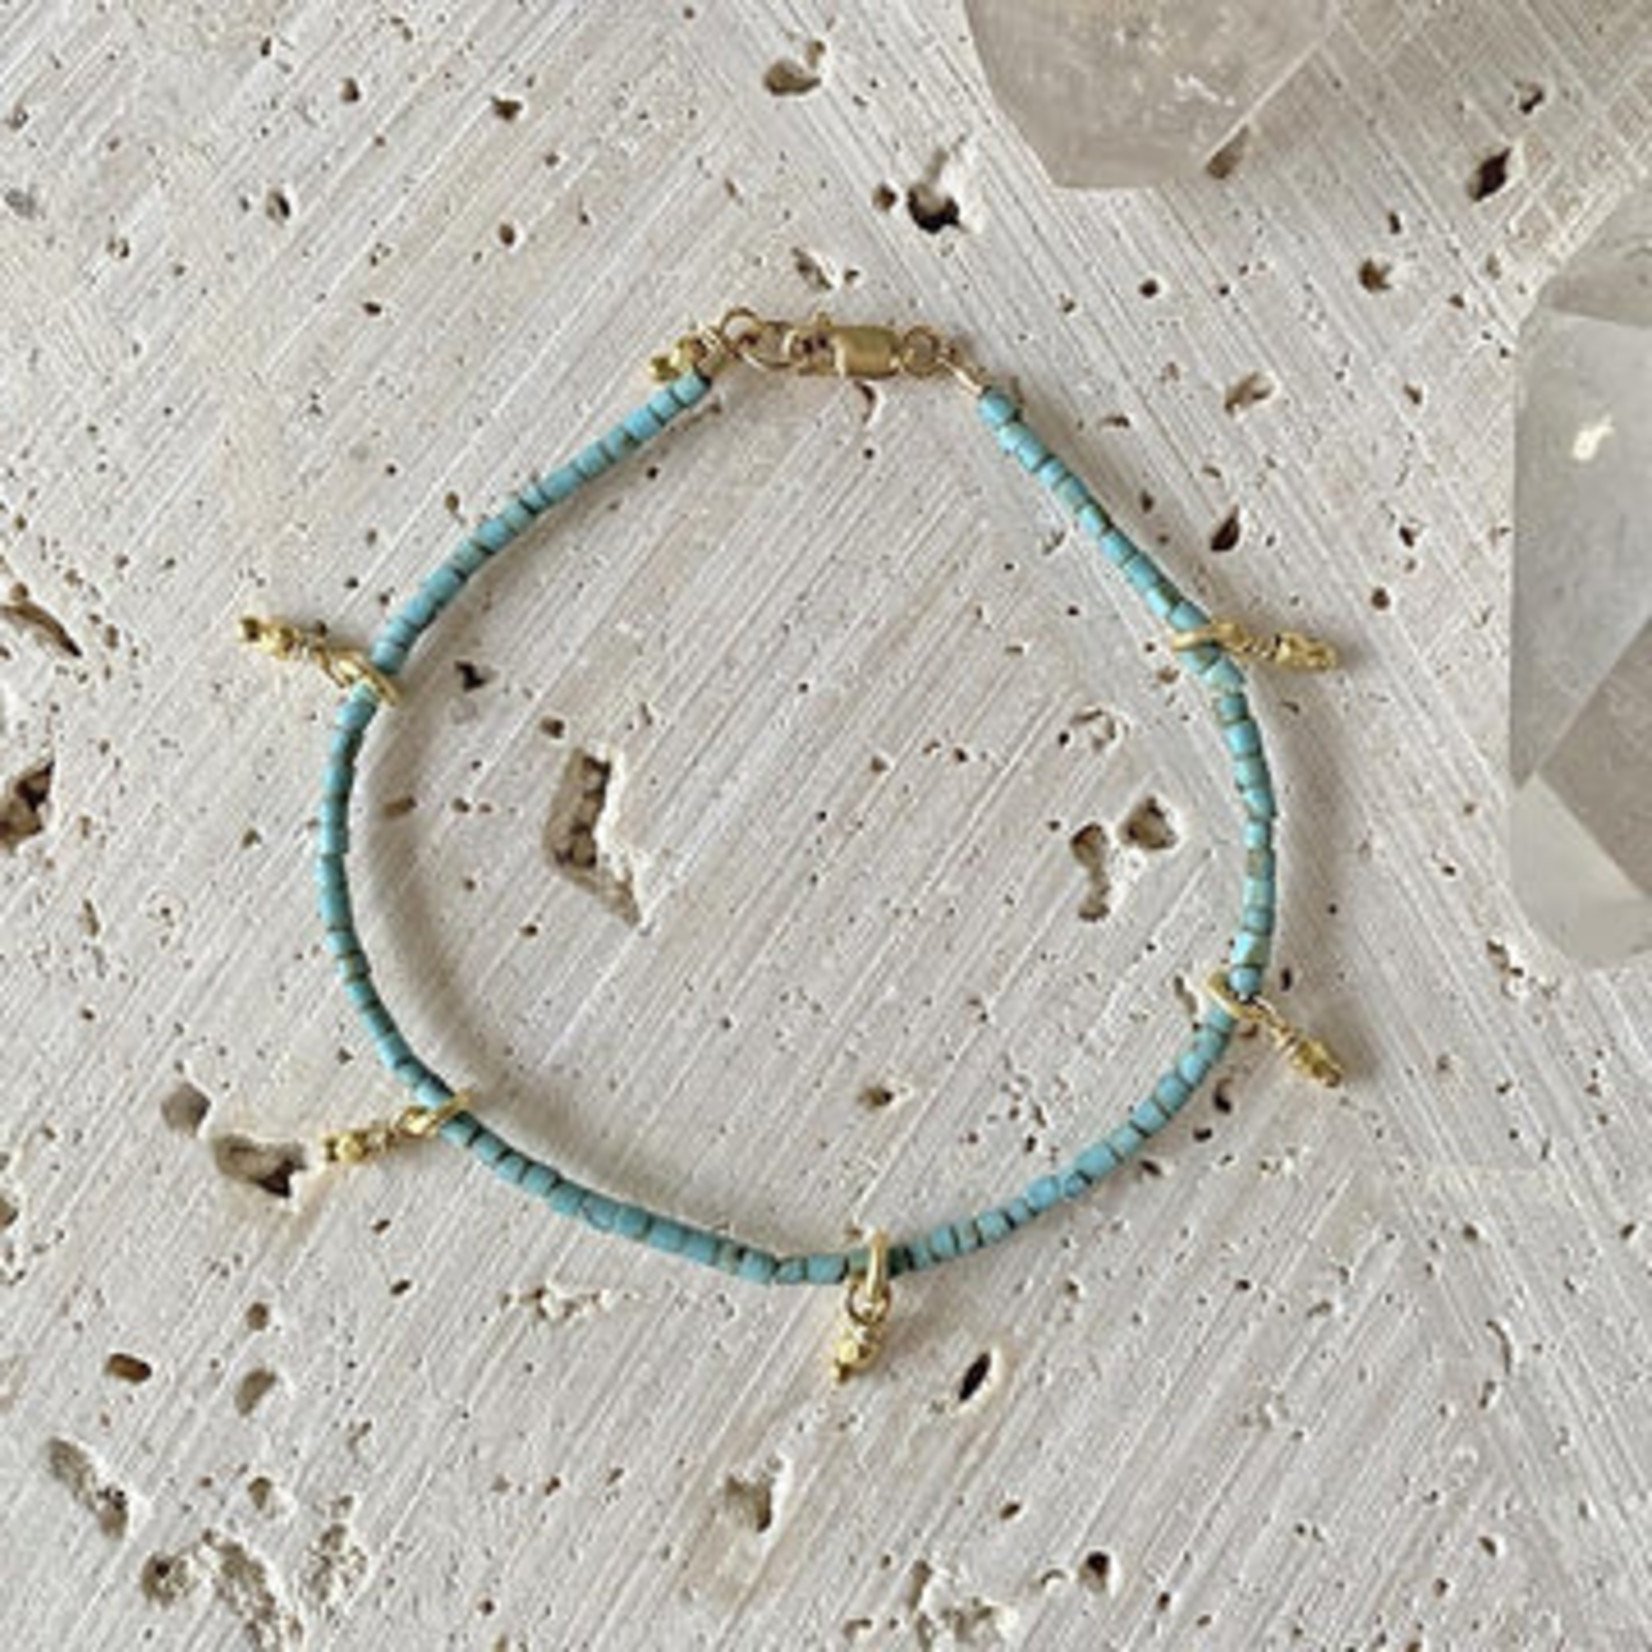 22k GV Bracelet w/ Turquoise Beads and Gold Bead Stations